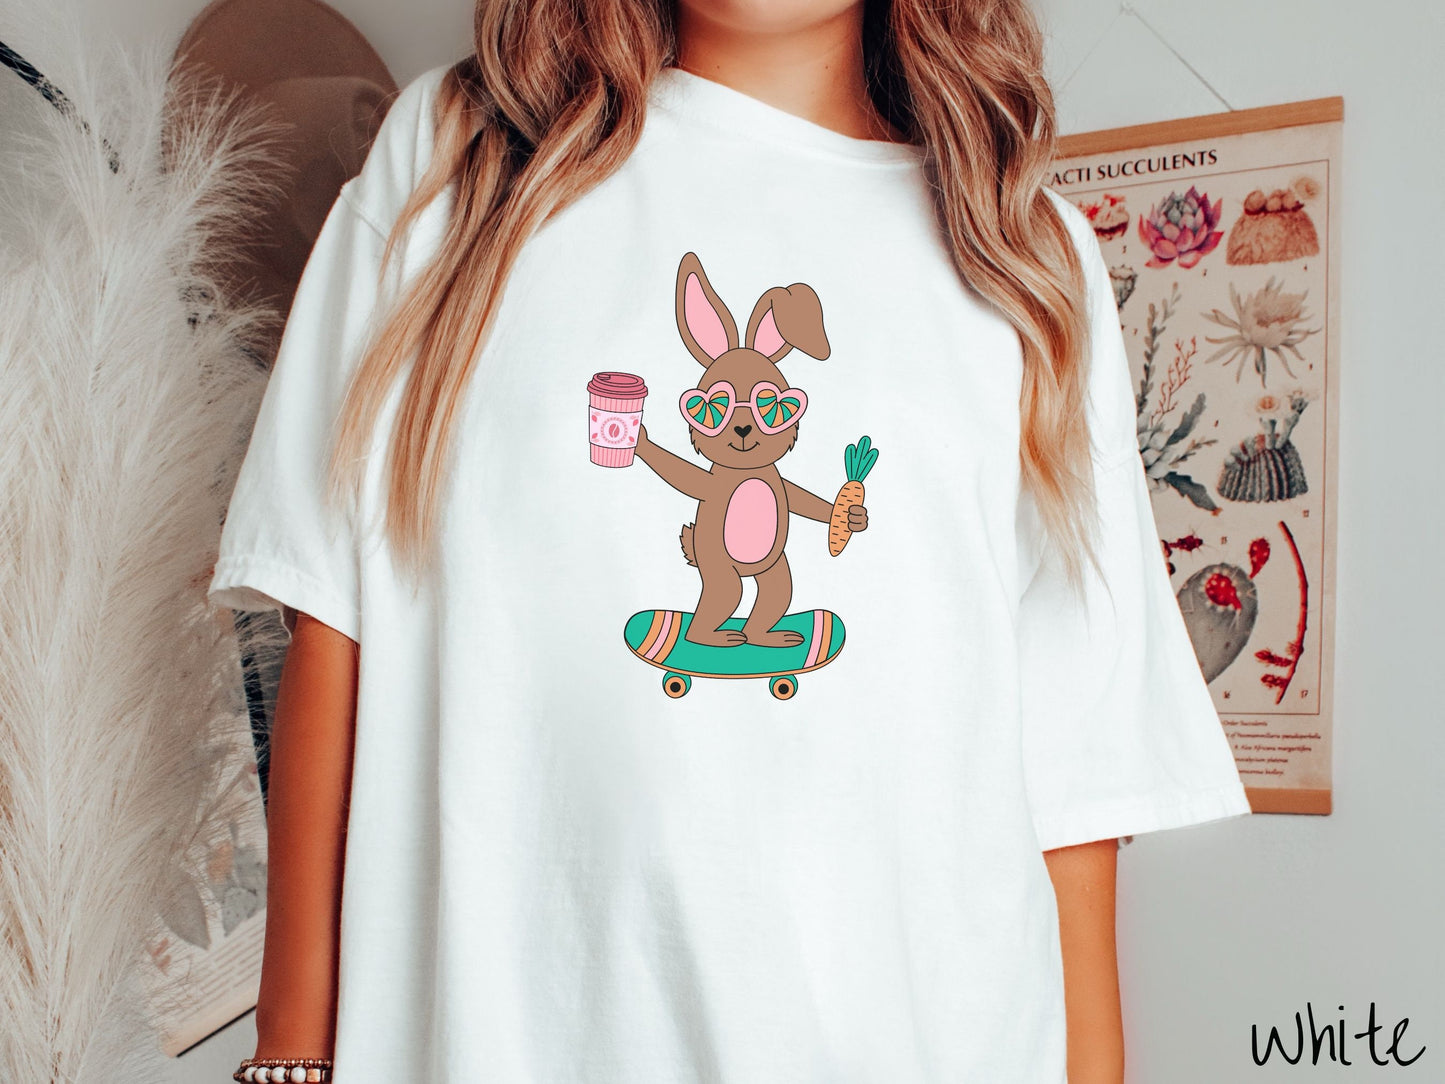 A woman wearing a cute, vintage white colored shirt with a brown bunny rabbit with heart-shaped glasses, a carrot in one hand, and a pink to-go coffee in the other, riding a green, pink, and orange skateboard.